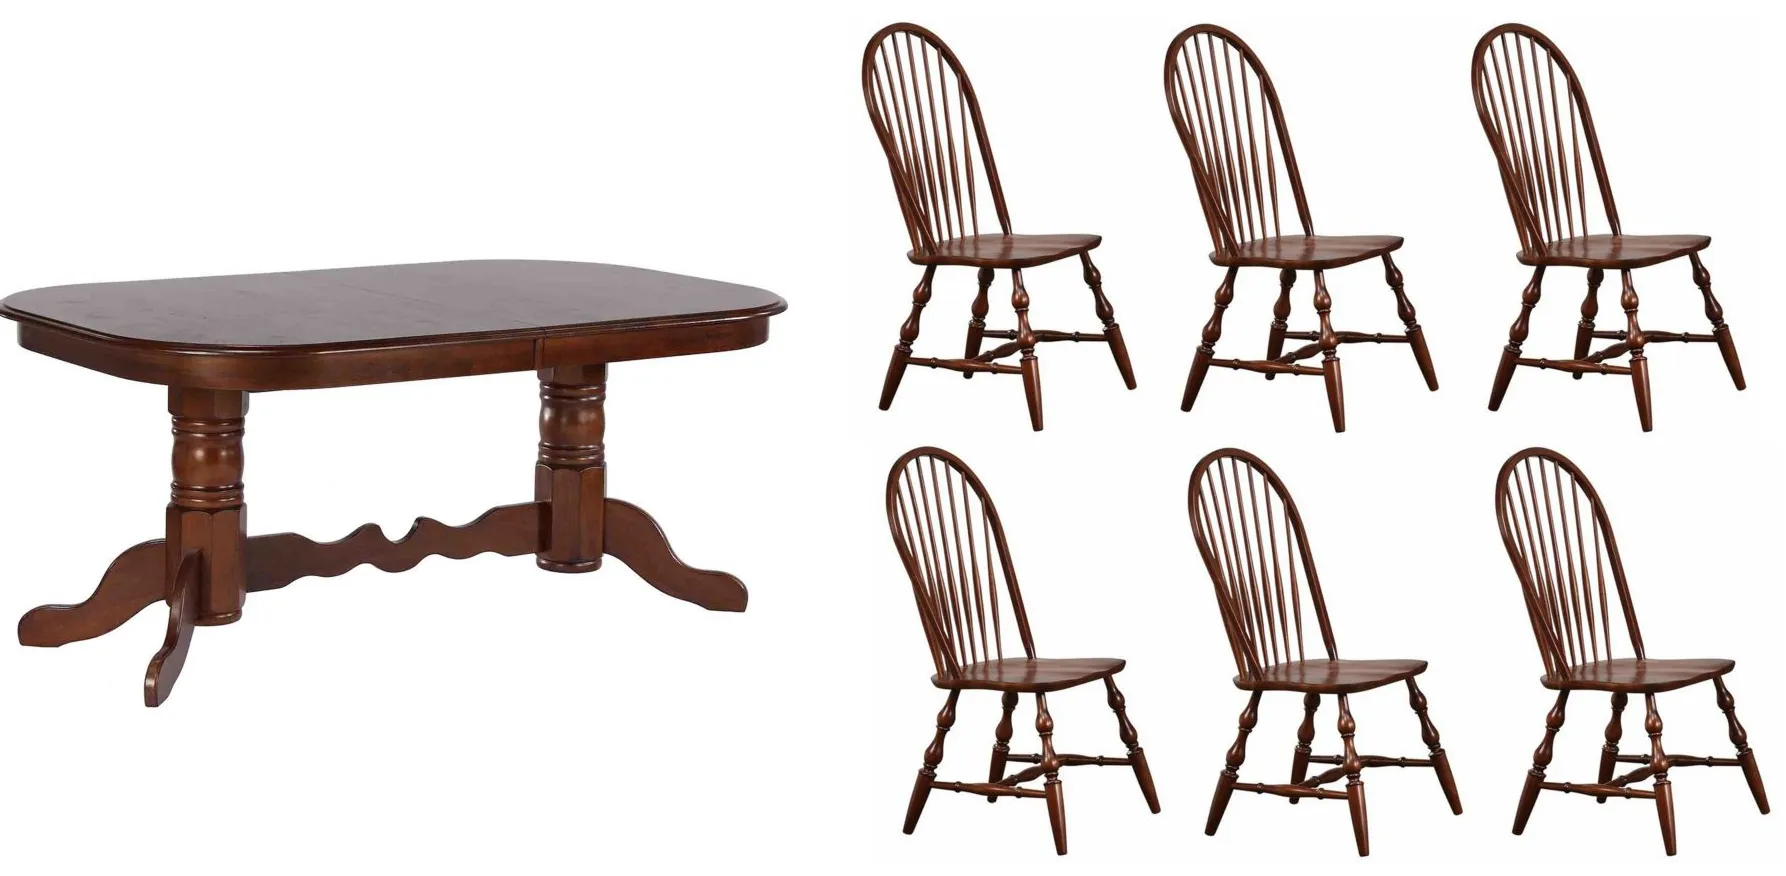 Fenway 7-pc. Dining Set w/ Double Pedestal Table in Chestnut by Sunset Trading